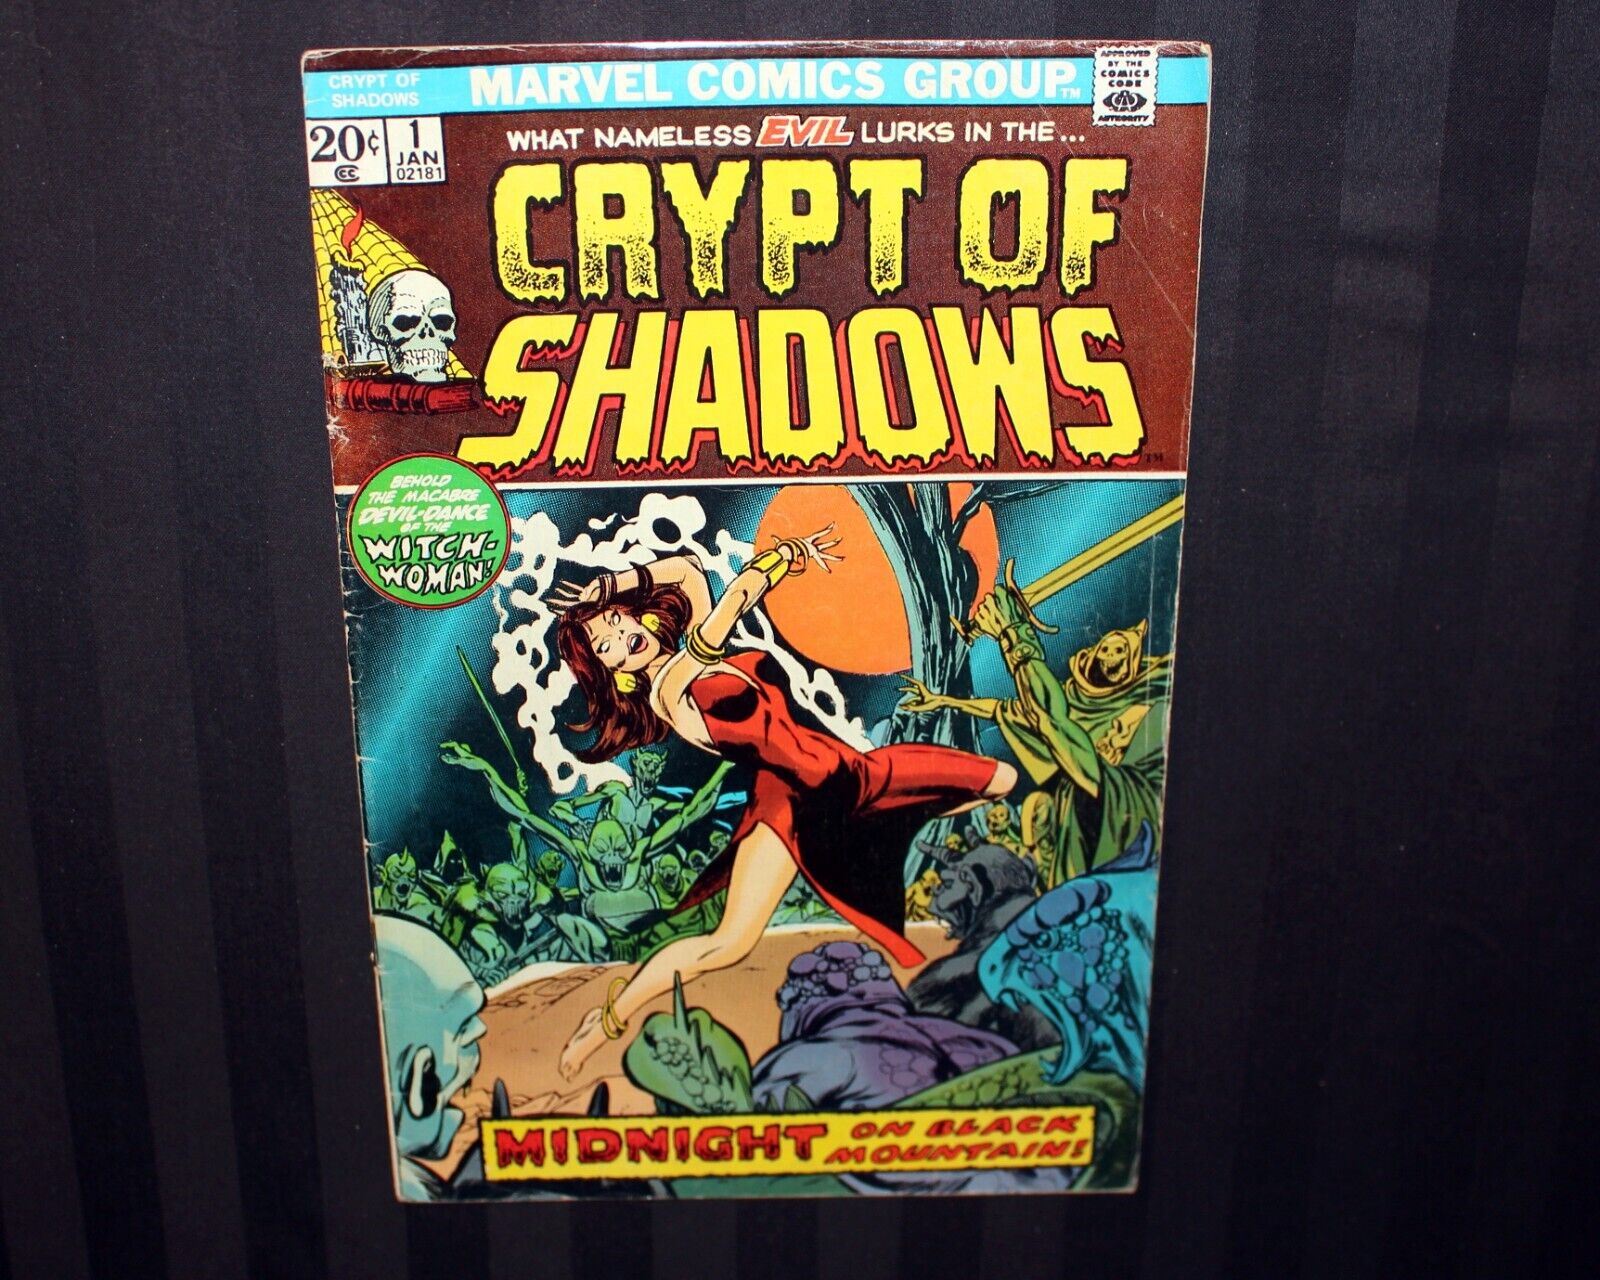 Vintage Bronze Age Marvel - CRYPT OF SHADOWS #1 1973 - Gil Kane Witch Woman, FN-